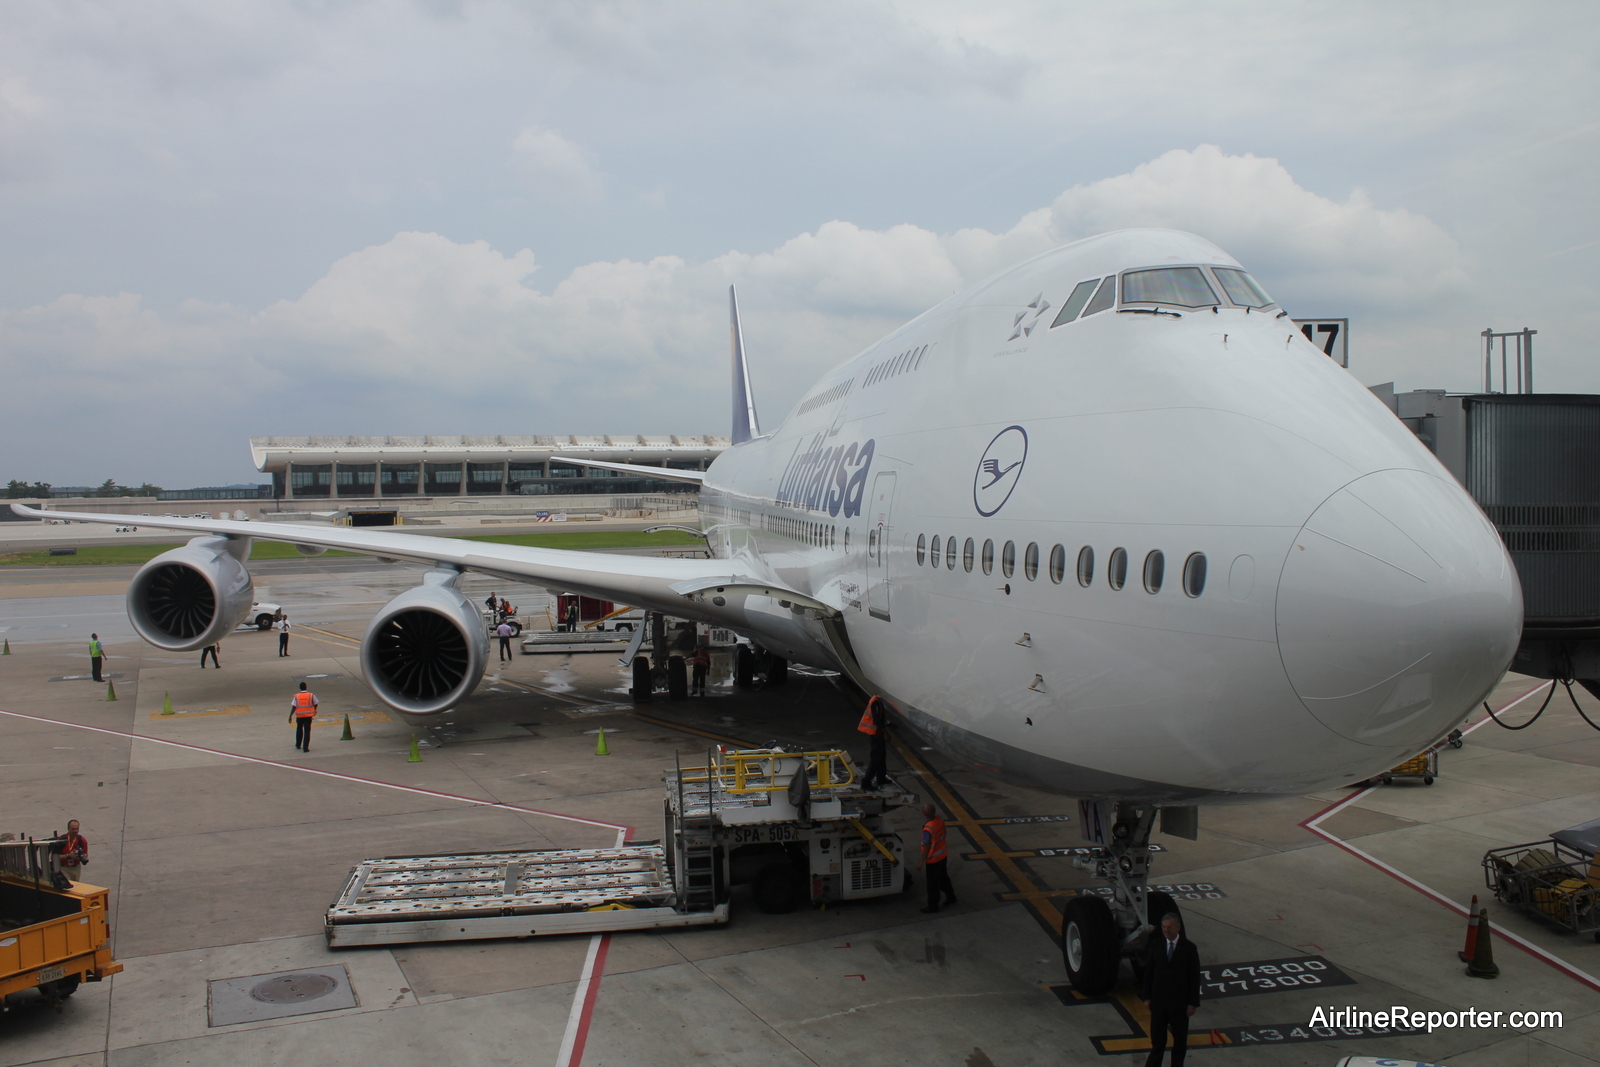 Flying On The Inaugural Boeing 747 8 Intercontinental Flight